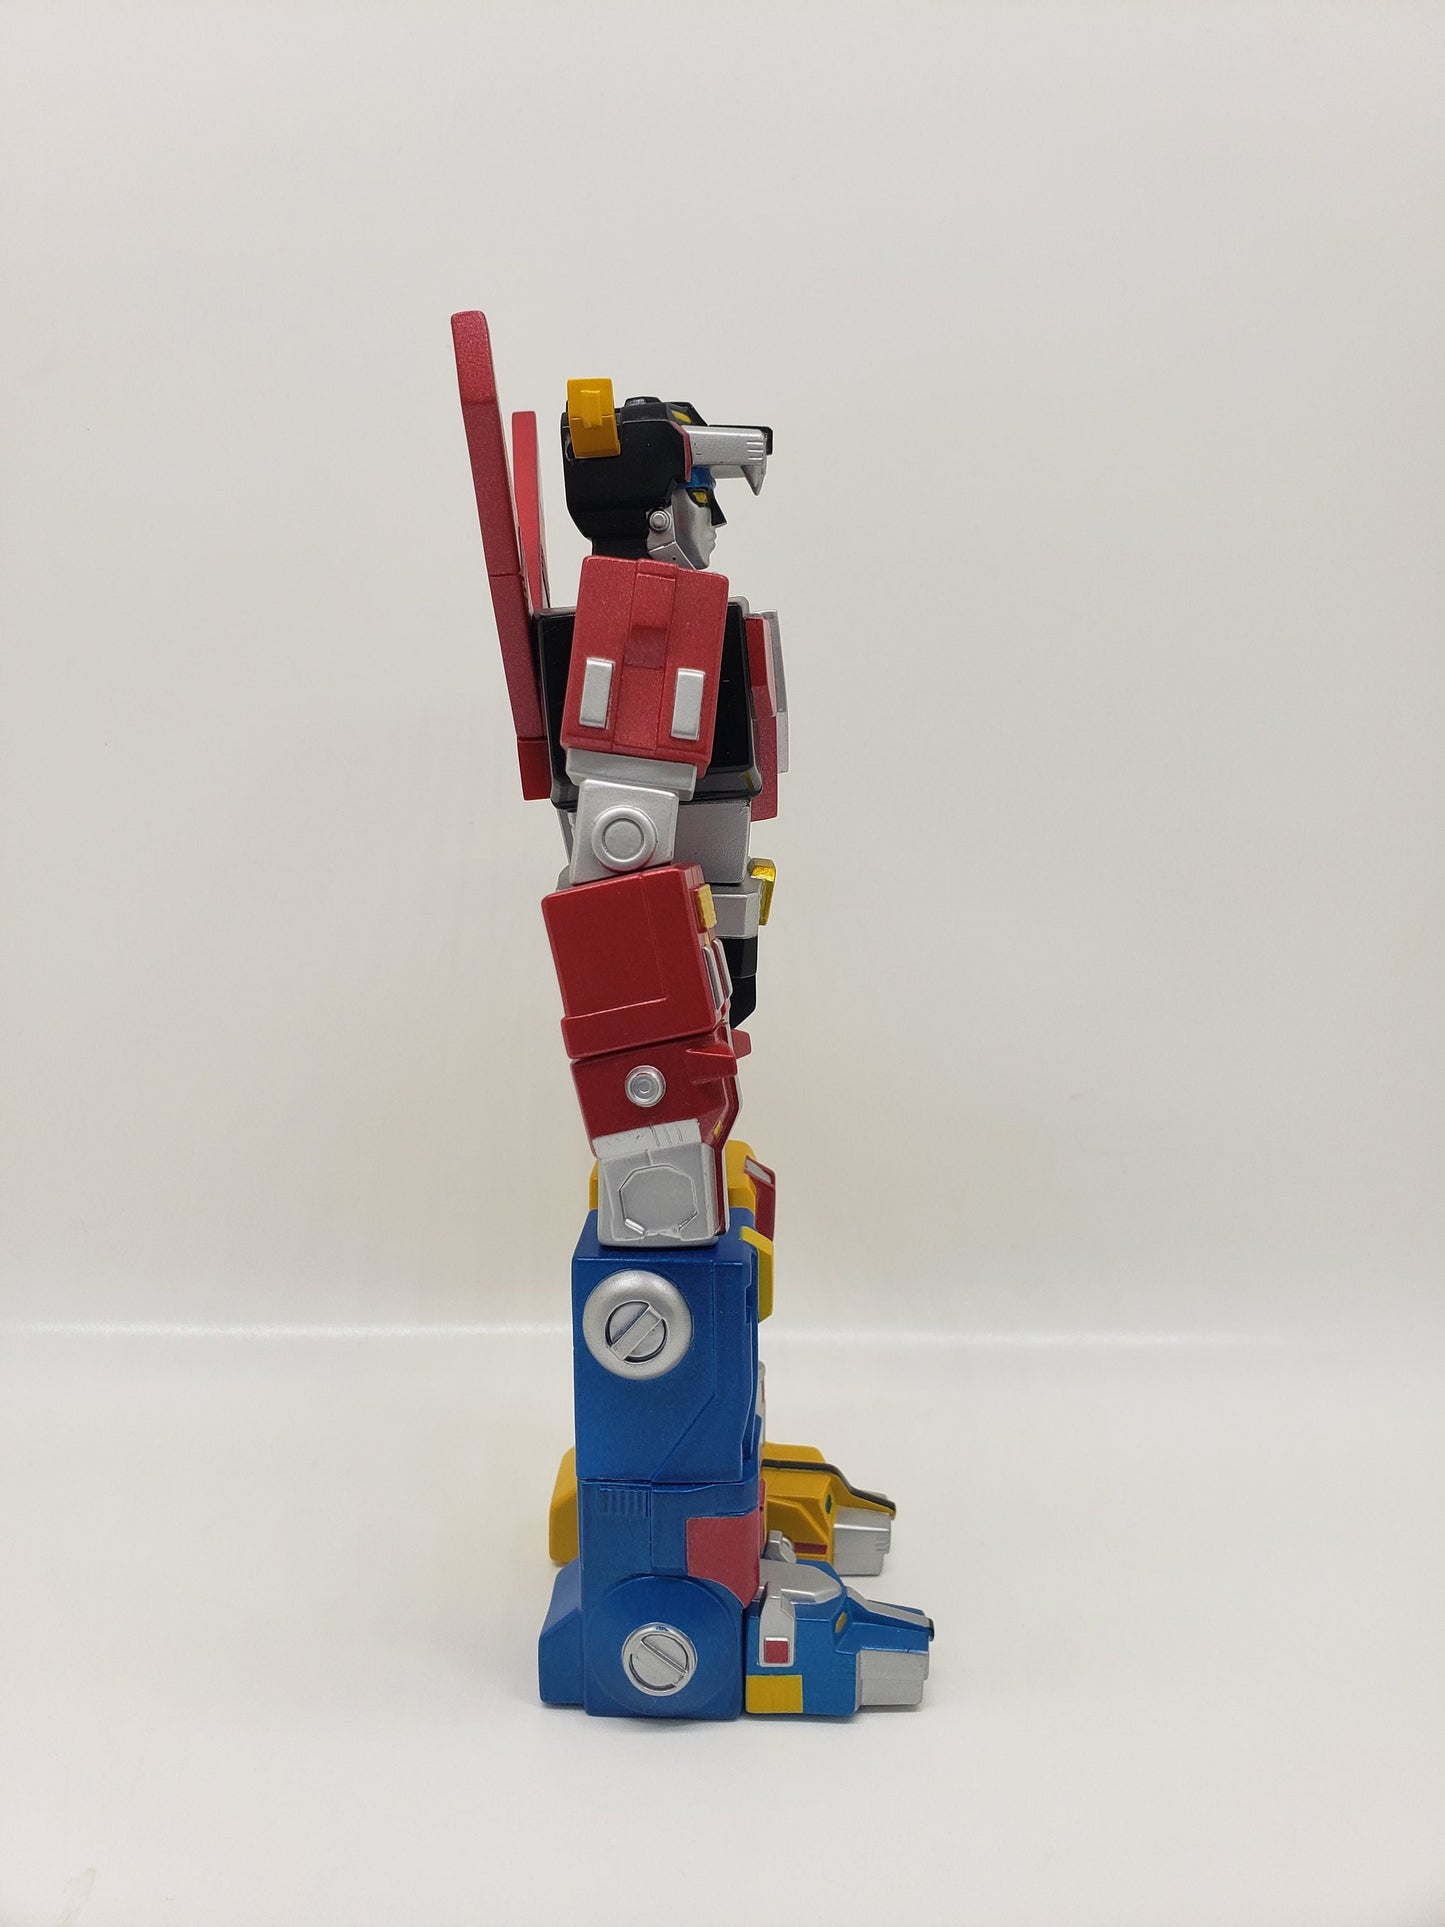 Toynami Voltron Vinyl Action Figure Red 2009 WEP Vintage Collectable Vinyl Designer Toy Pop Culture Perfect Birthday Gift